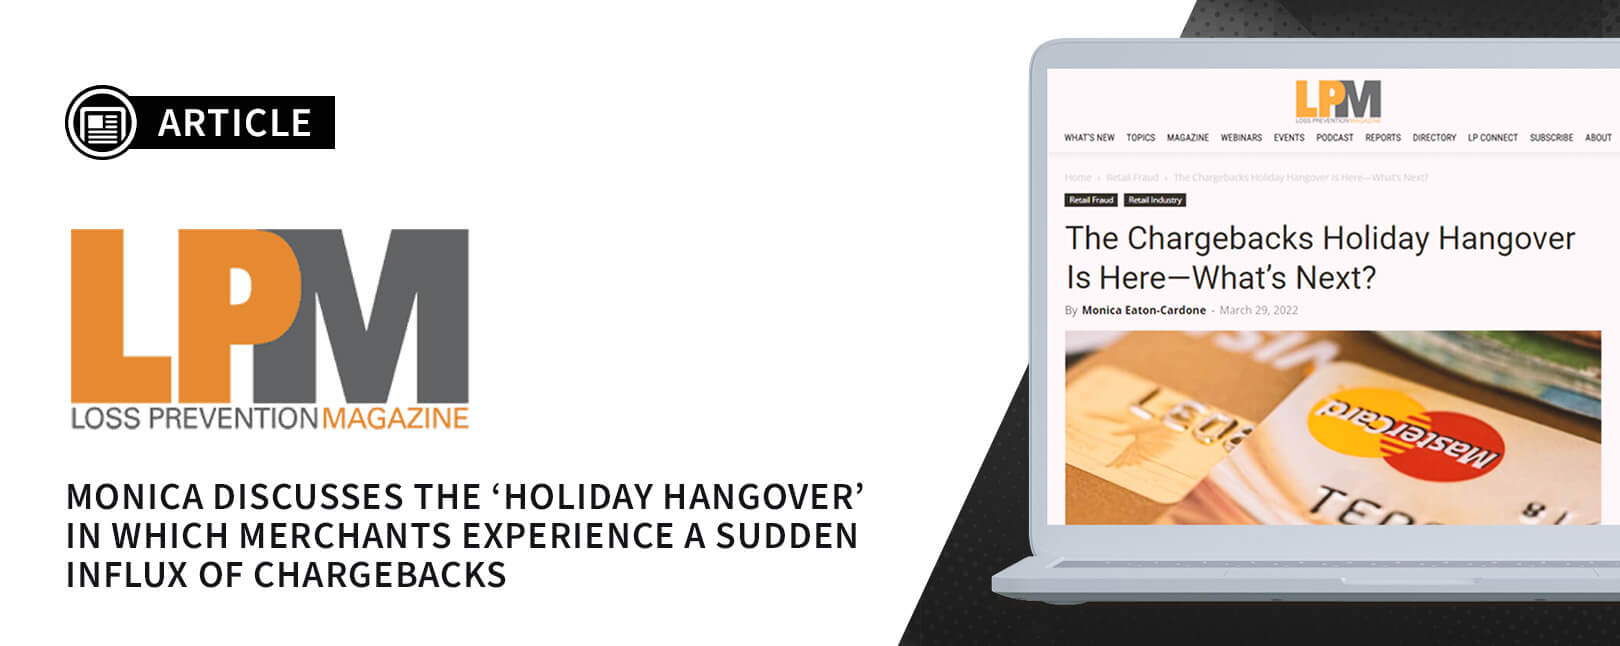 The Chargebacks Holiday Hangover Is Here—What’s Next?